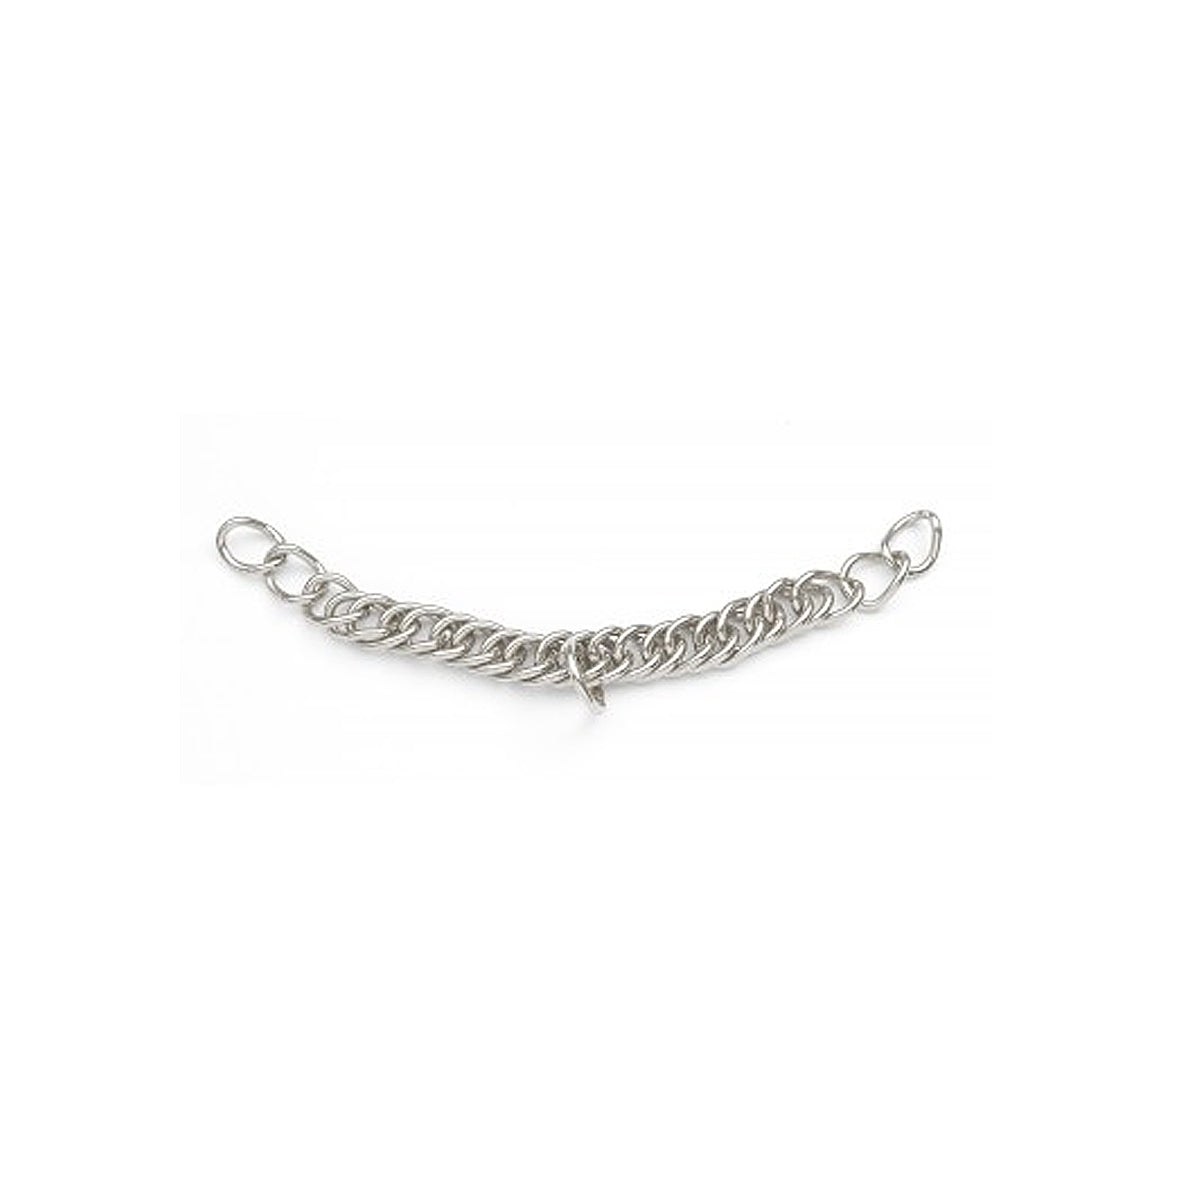 Centaur Stainless Steel Double Link Curb Chain